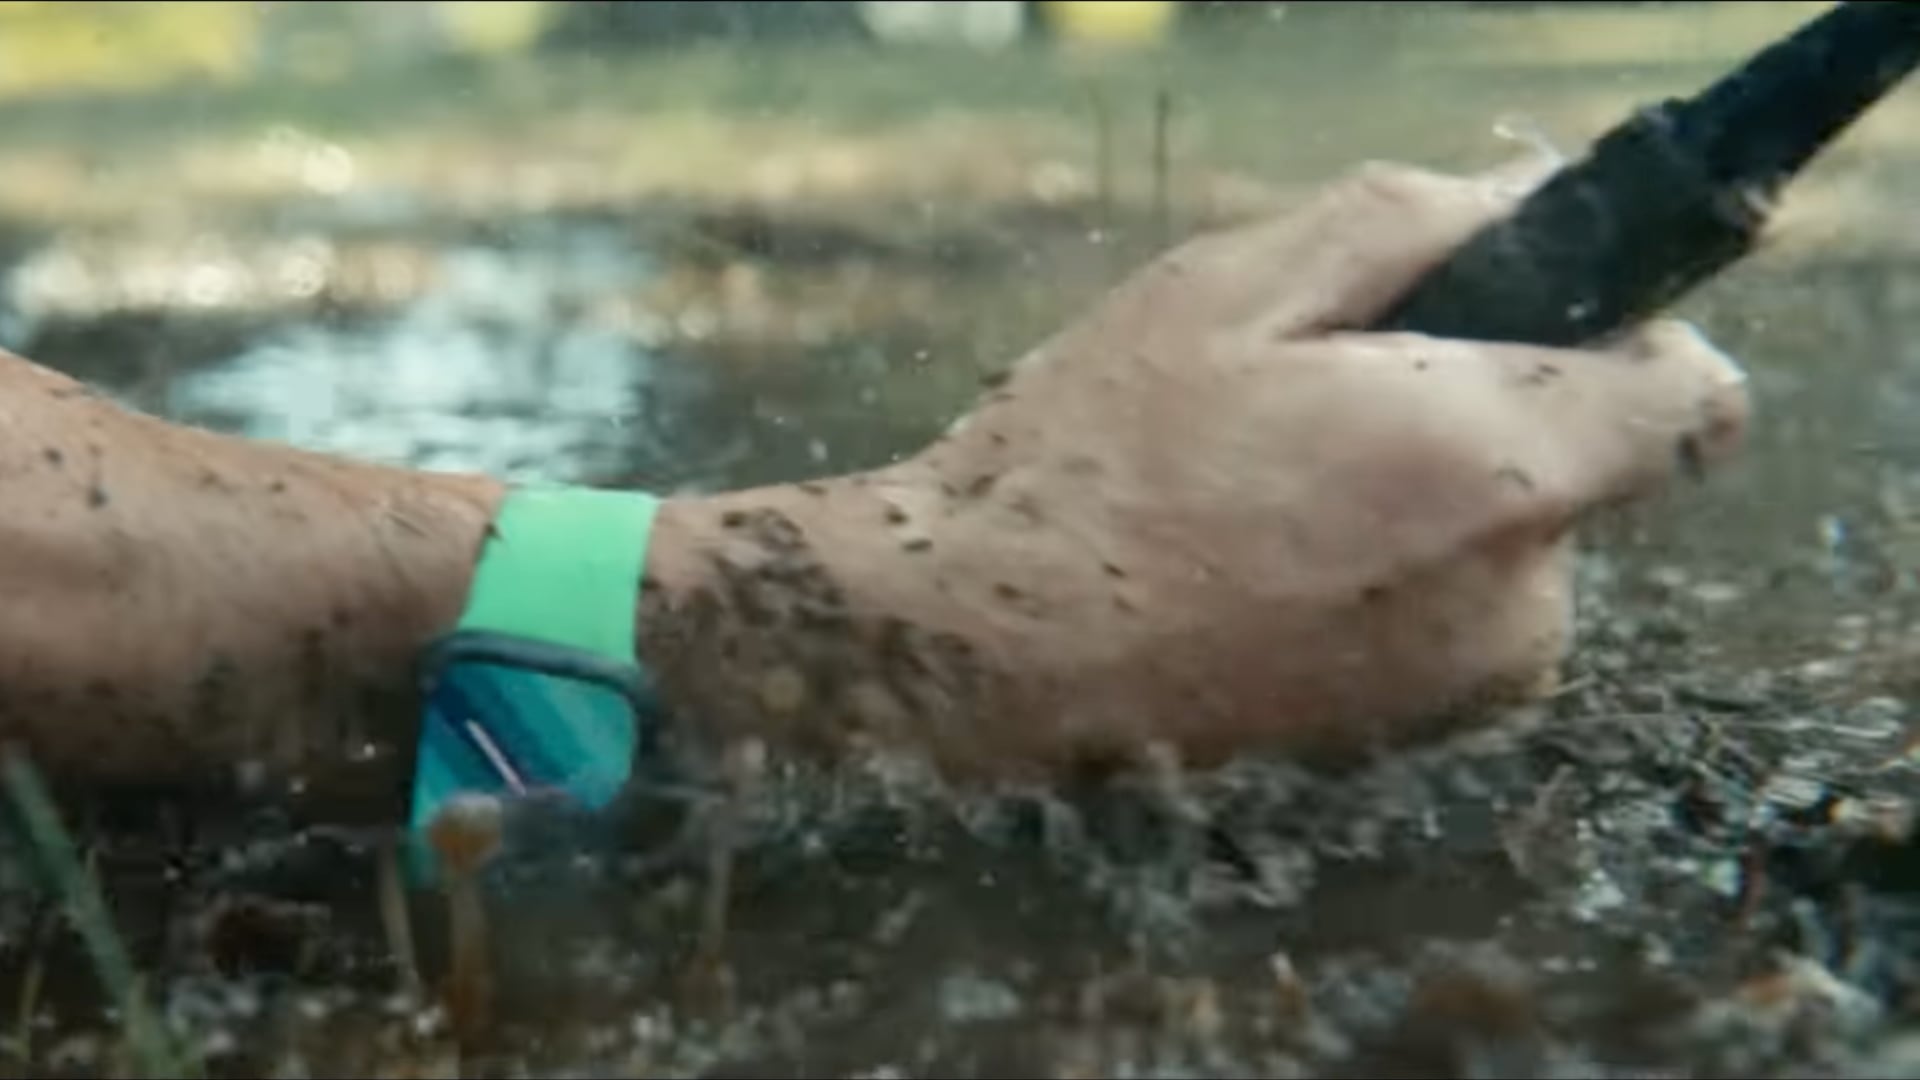 A closeup of a tennis player's forearm hitting the mud while wearing an Apple Watch Series 7 on their wrist and squeezing a racket in their hand